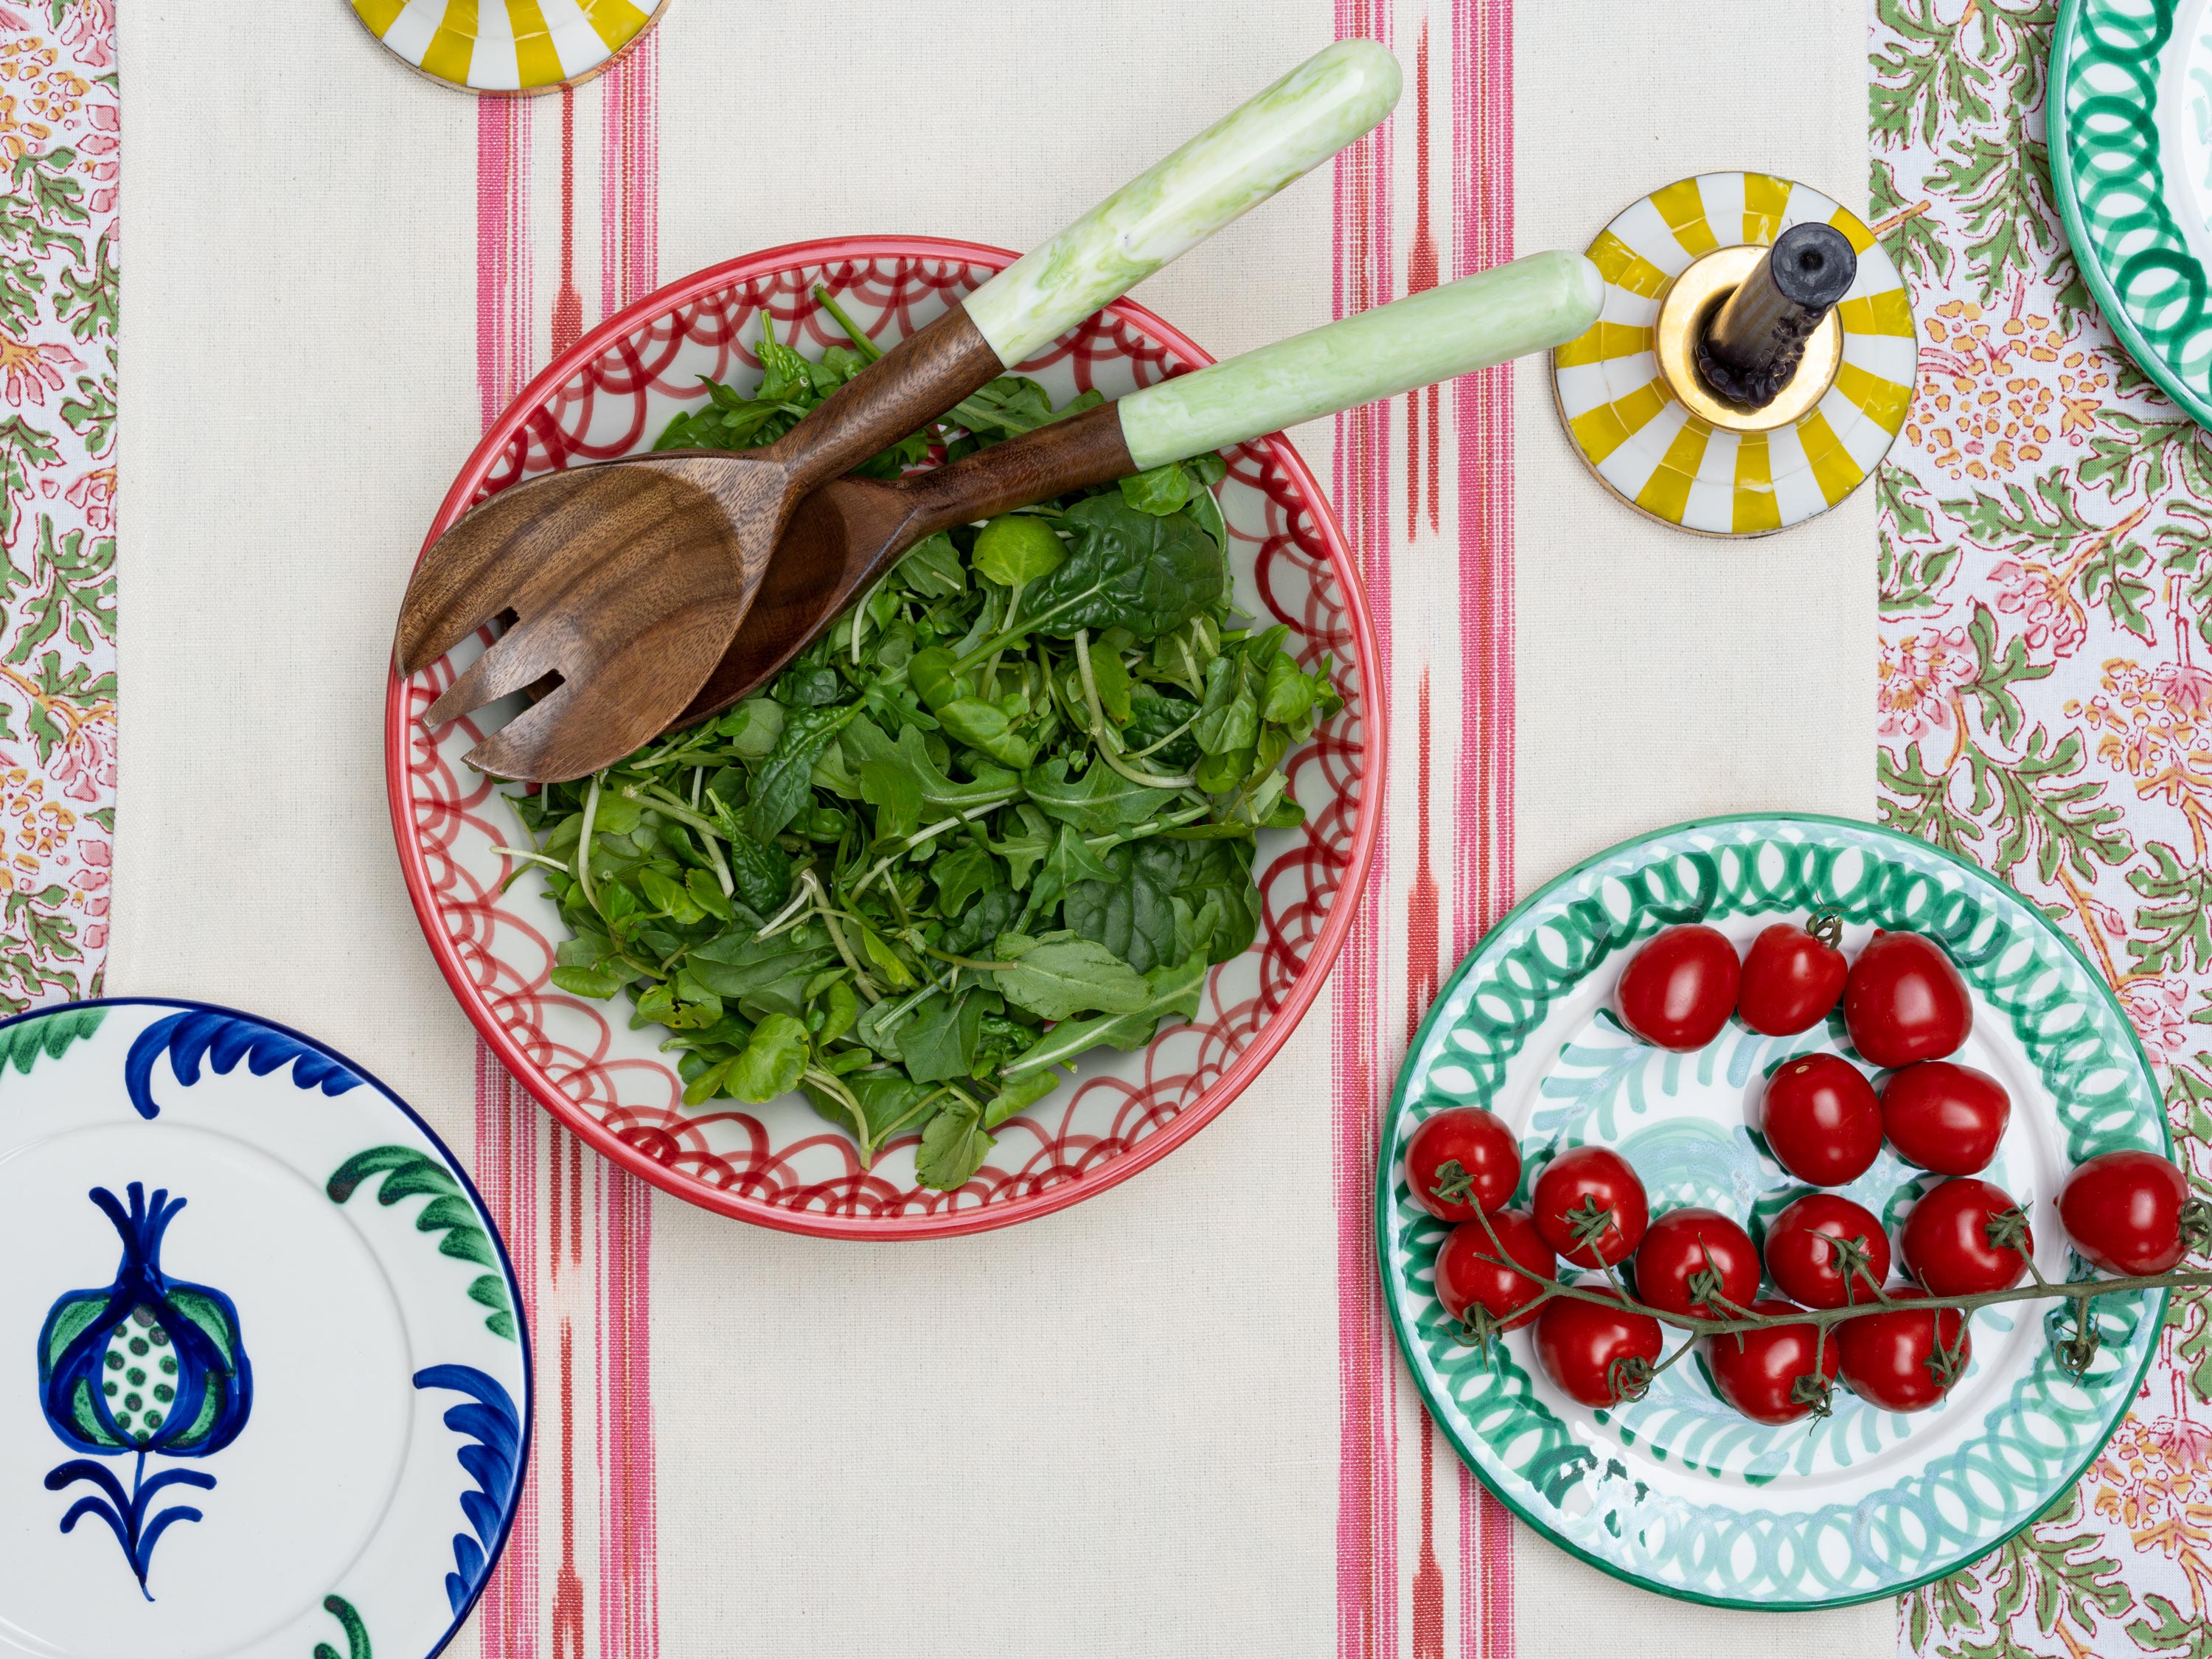 SIDE / DESSERT / SALAD PLATE - POMEGRANATE WITH SIDE FERNS - Part of our Soho Home Collection